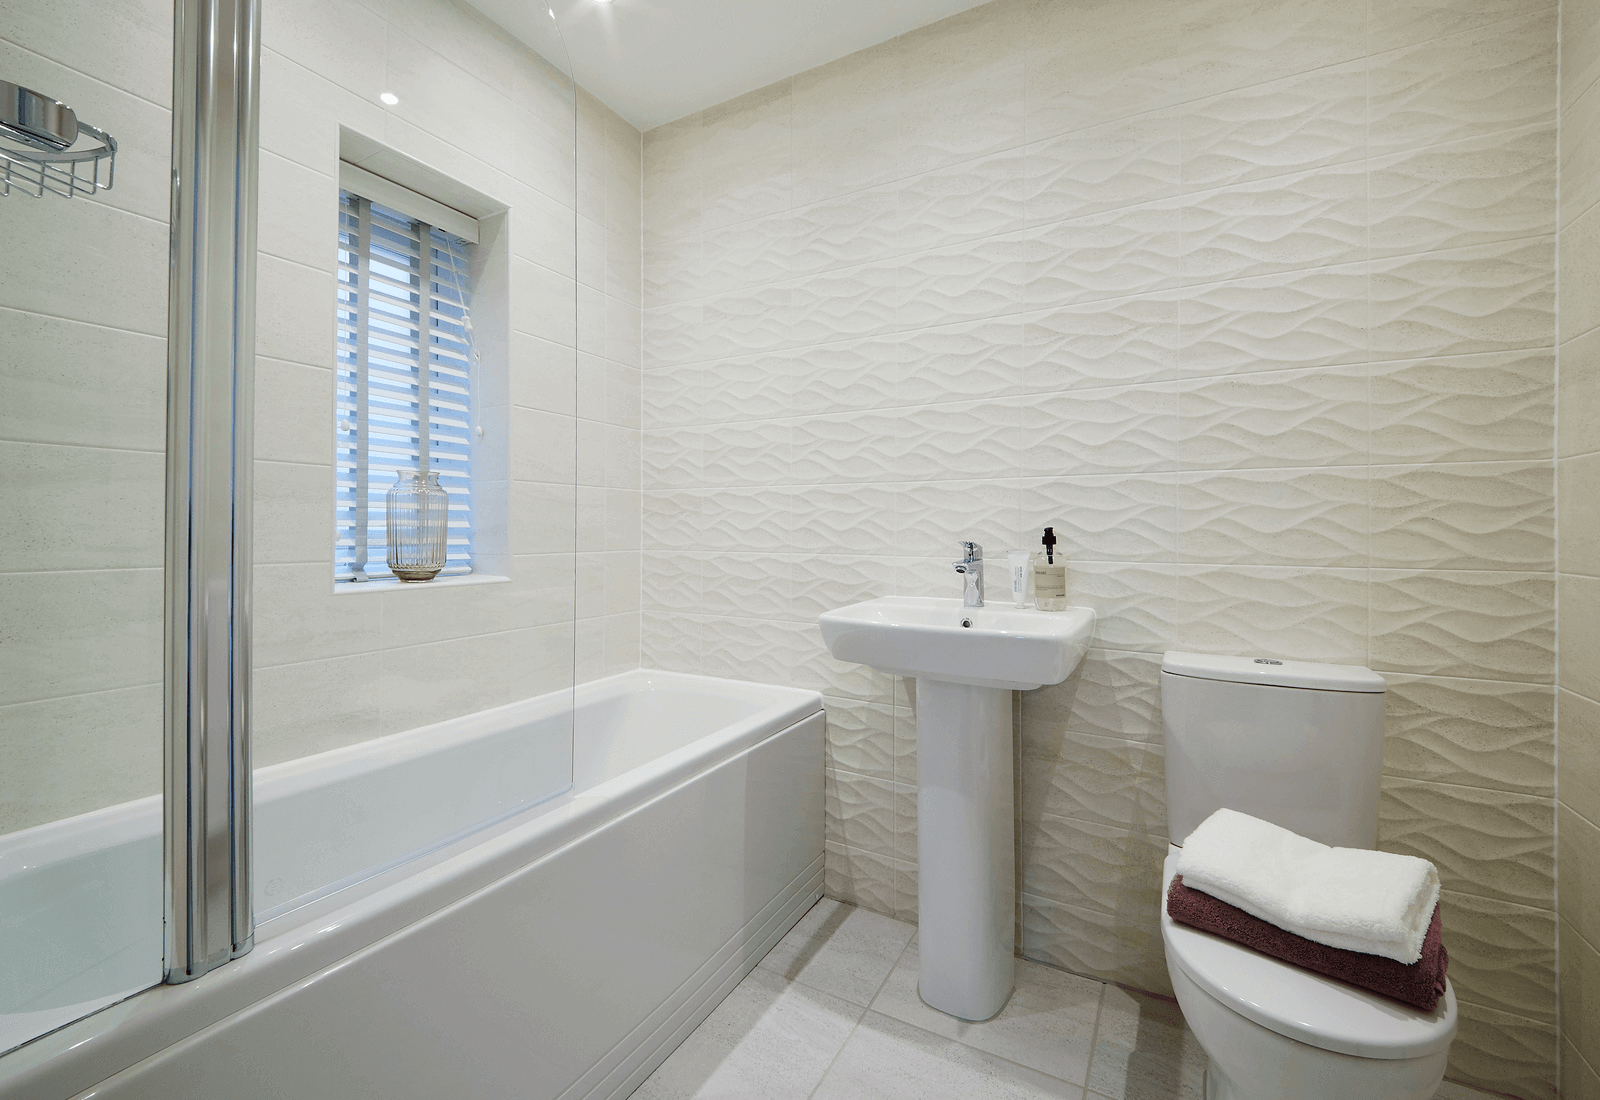 Bathroom in a Baycliffe Show Home